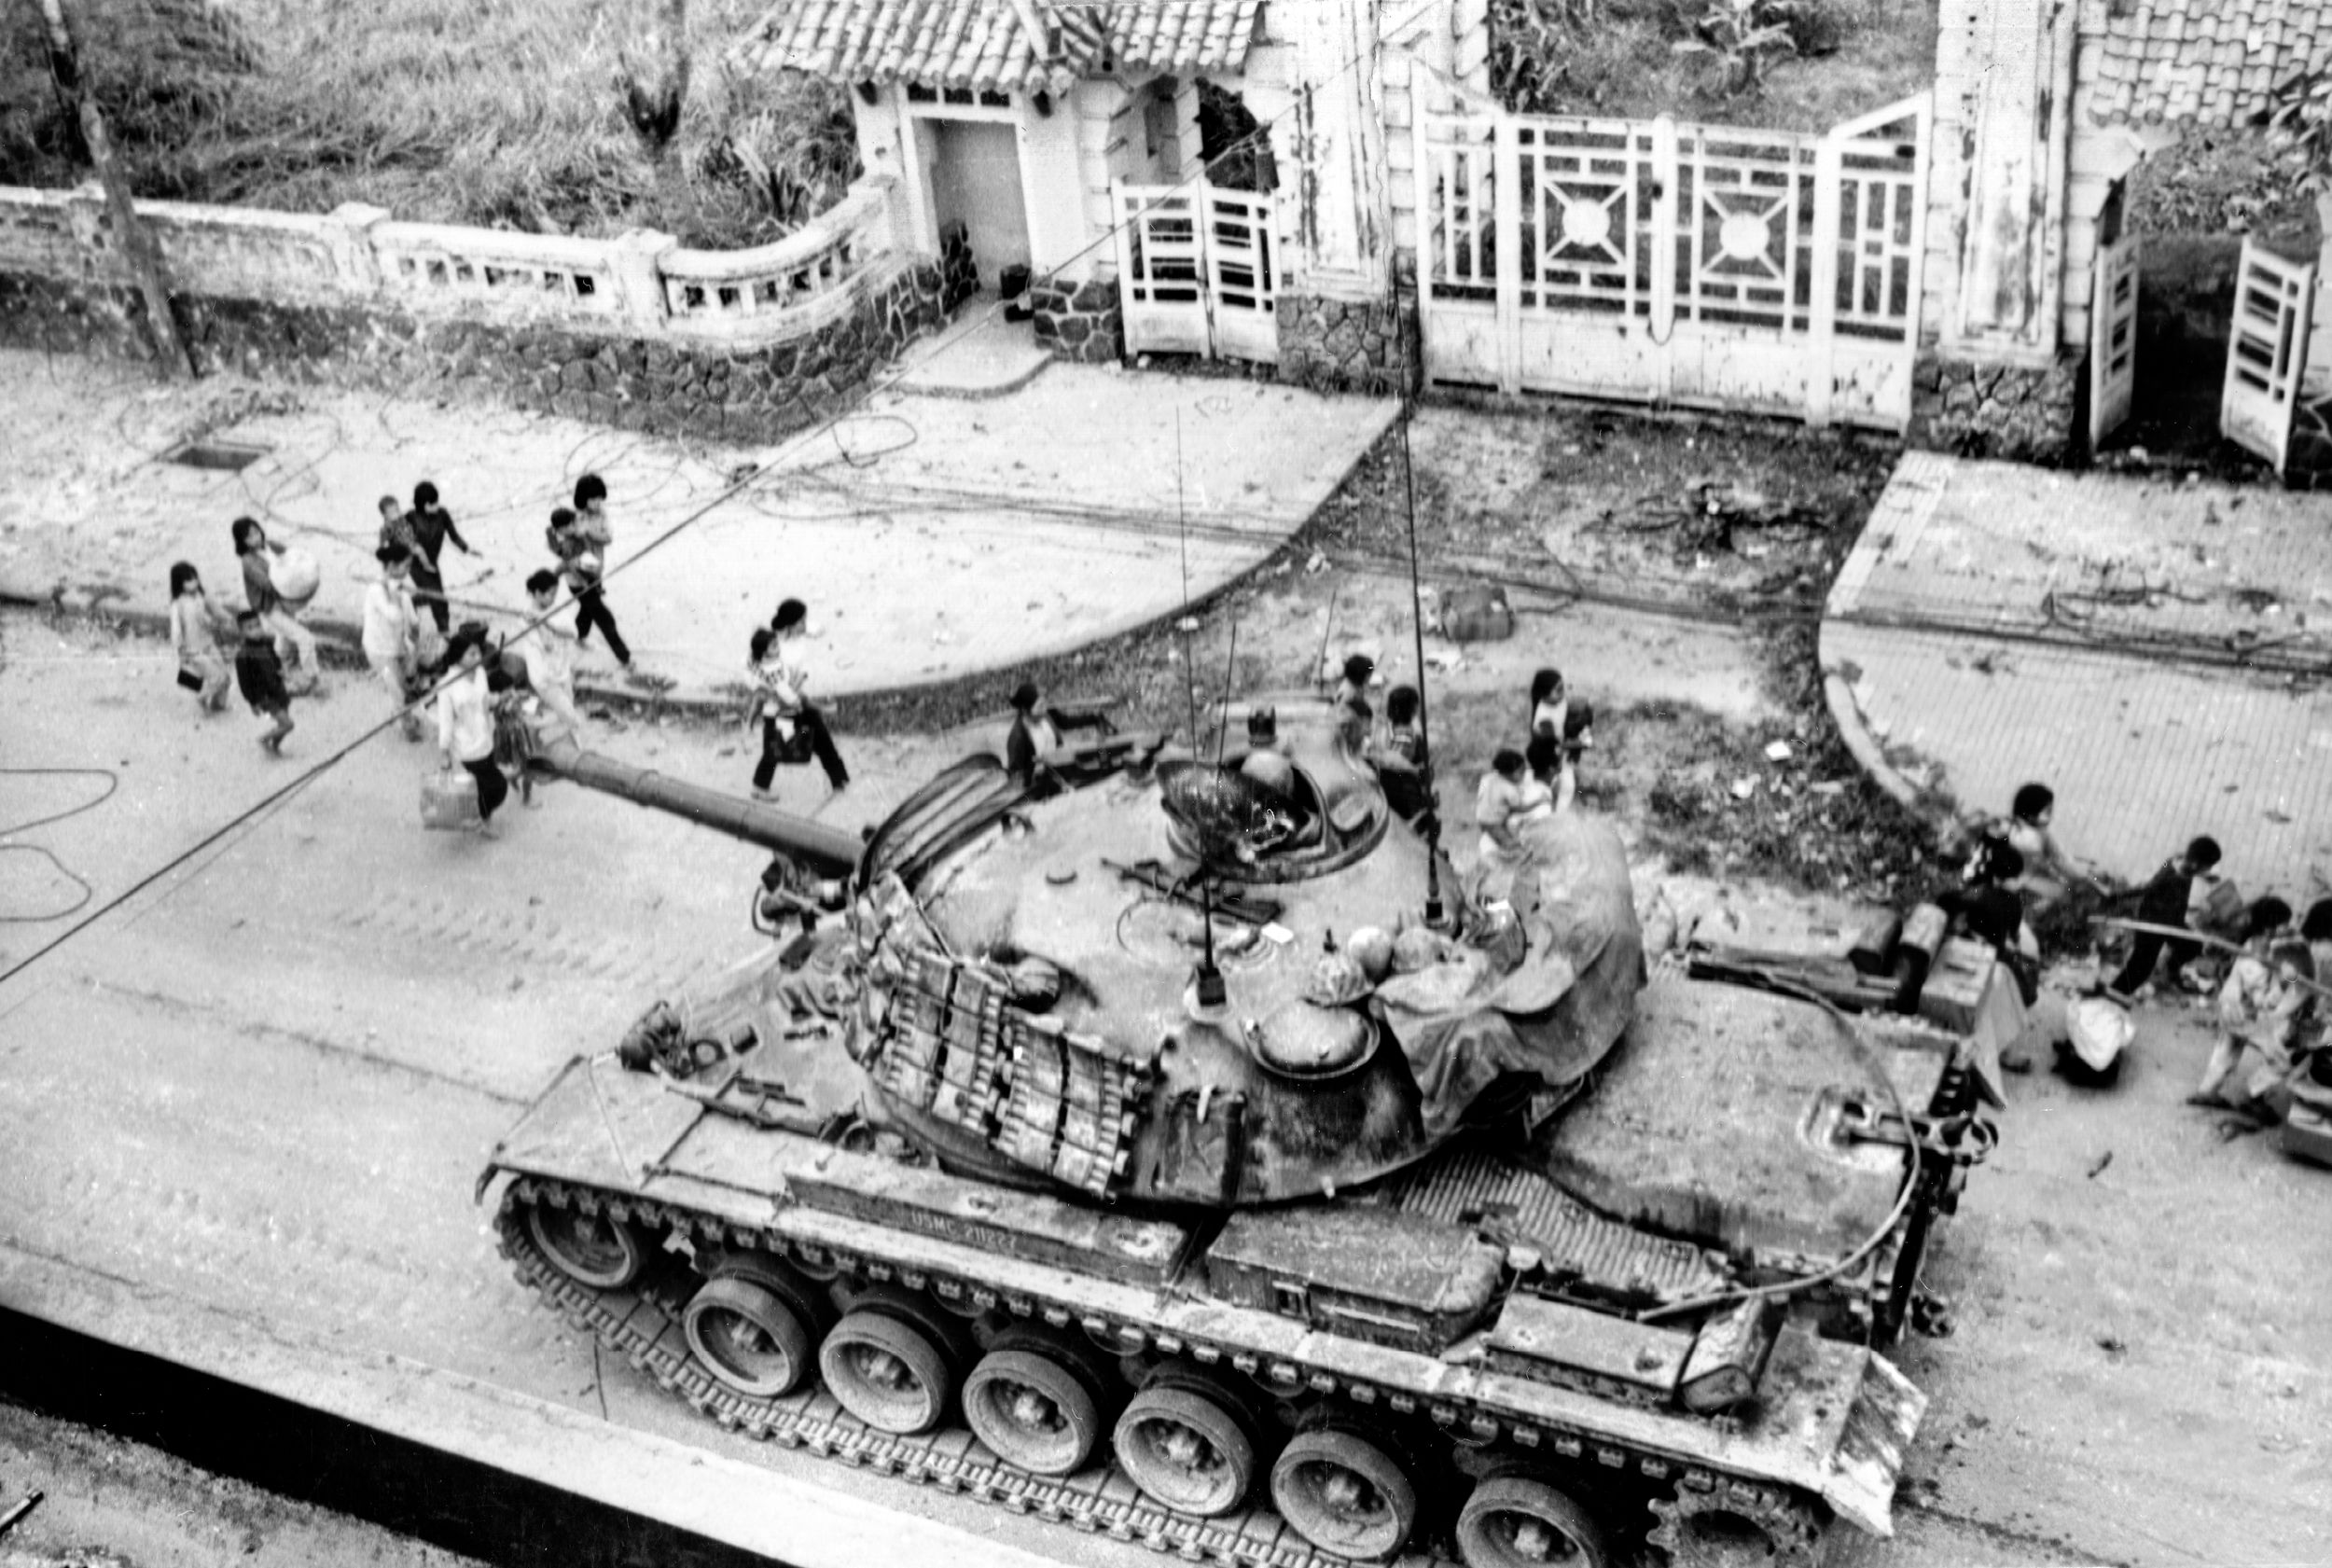 Refugees file past an M48 Patton Tank supporting the 1st Marine Division during the Battle of Hue City on February 3, 1968.